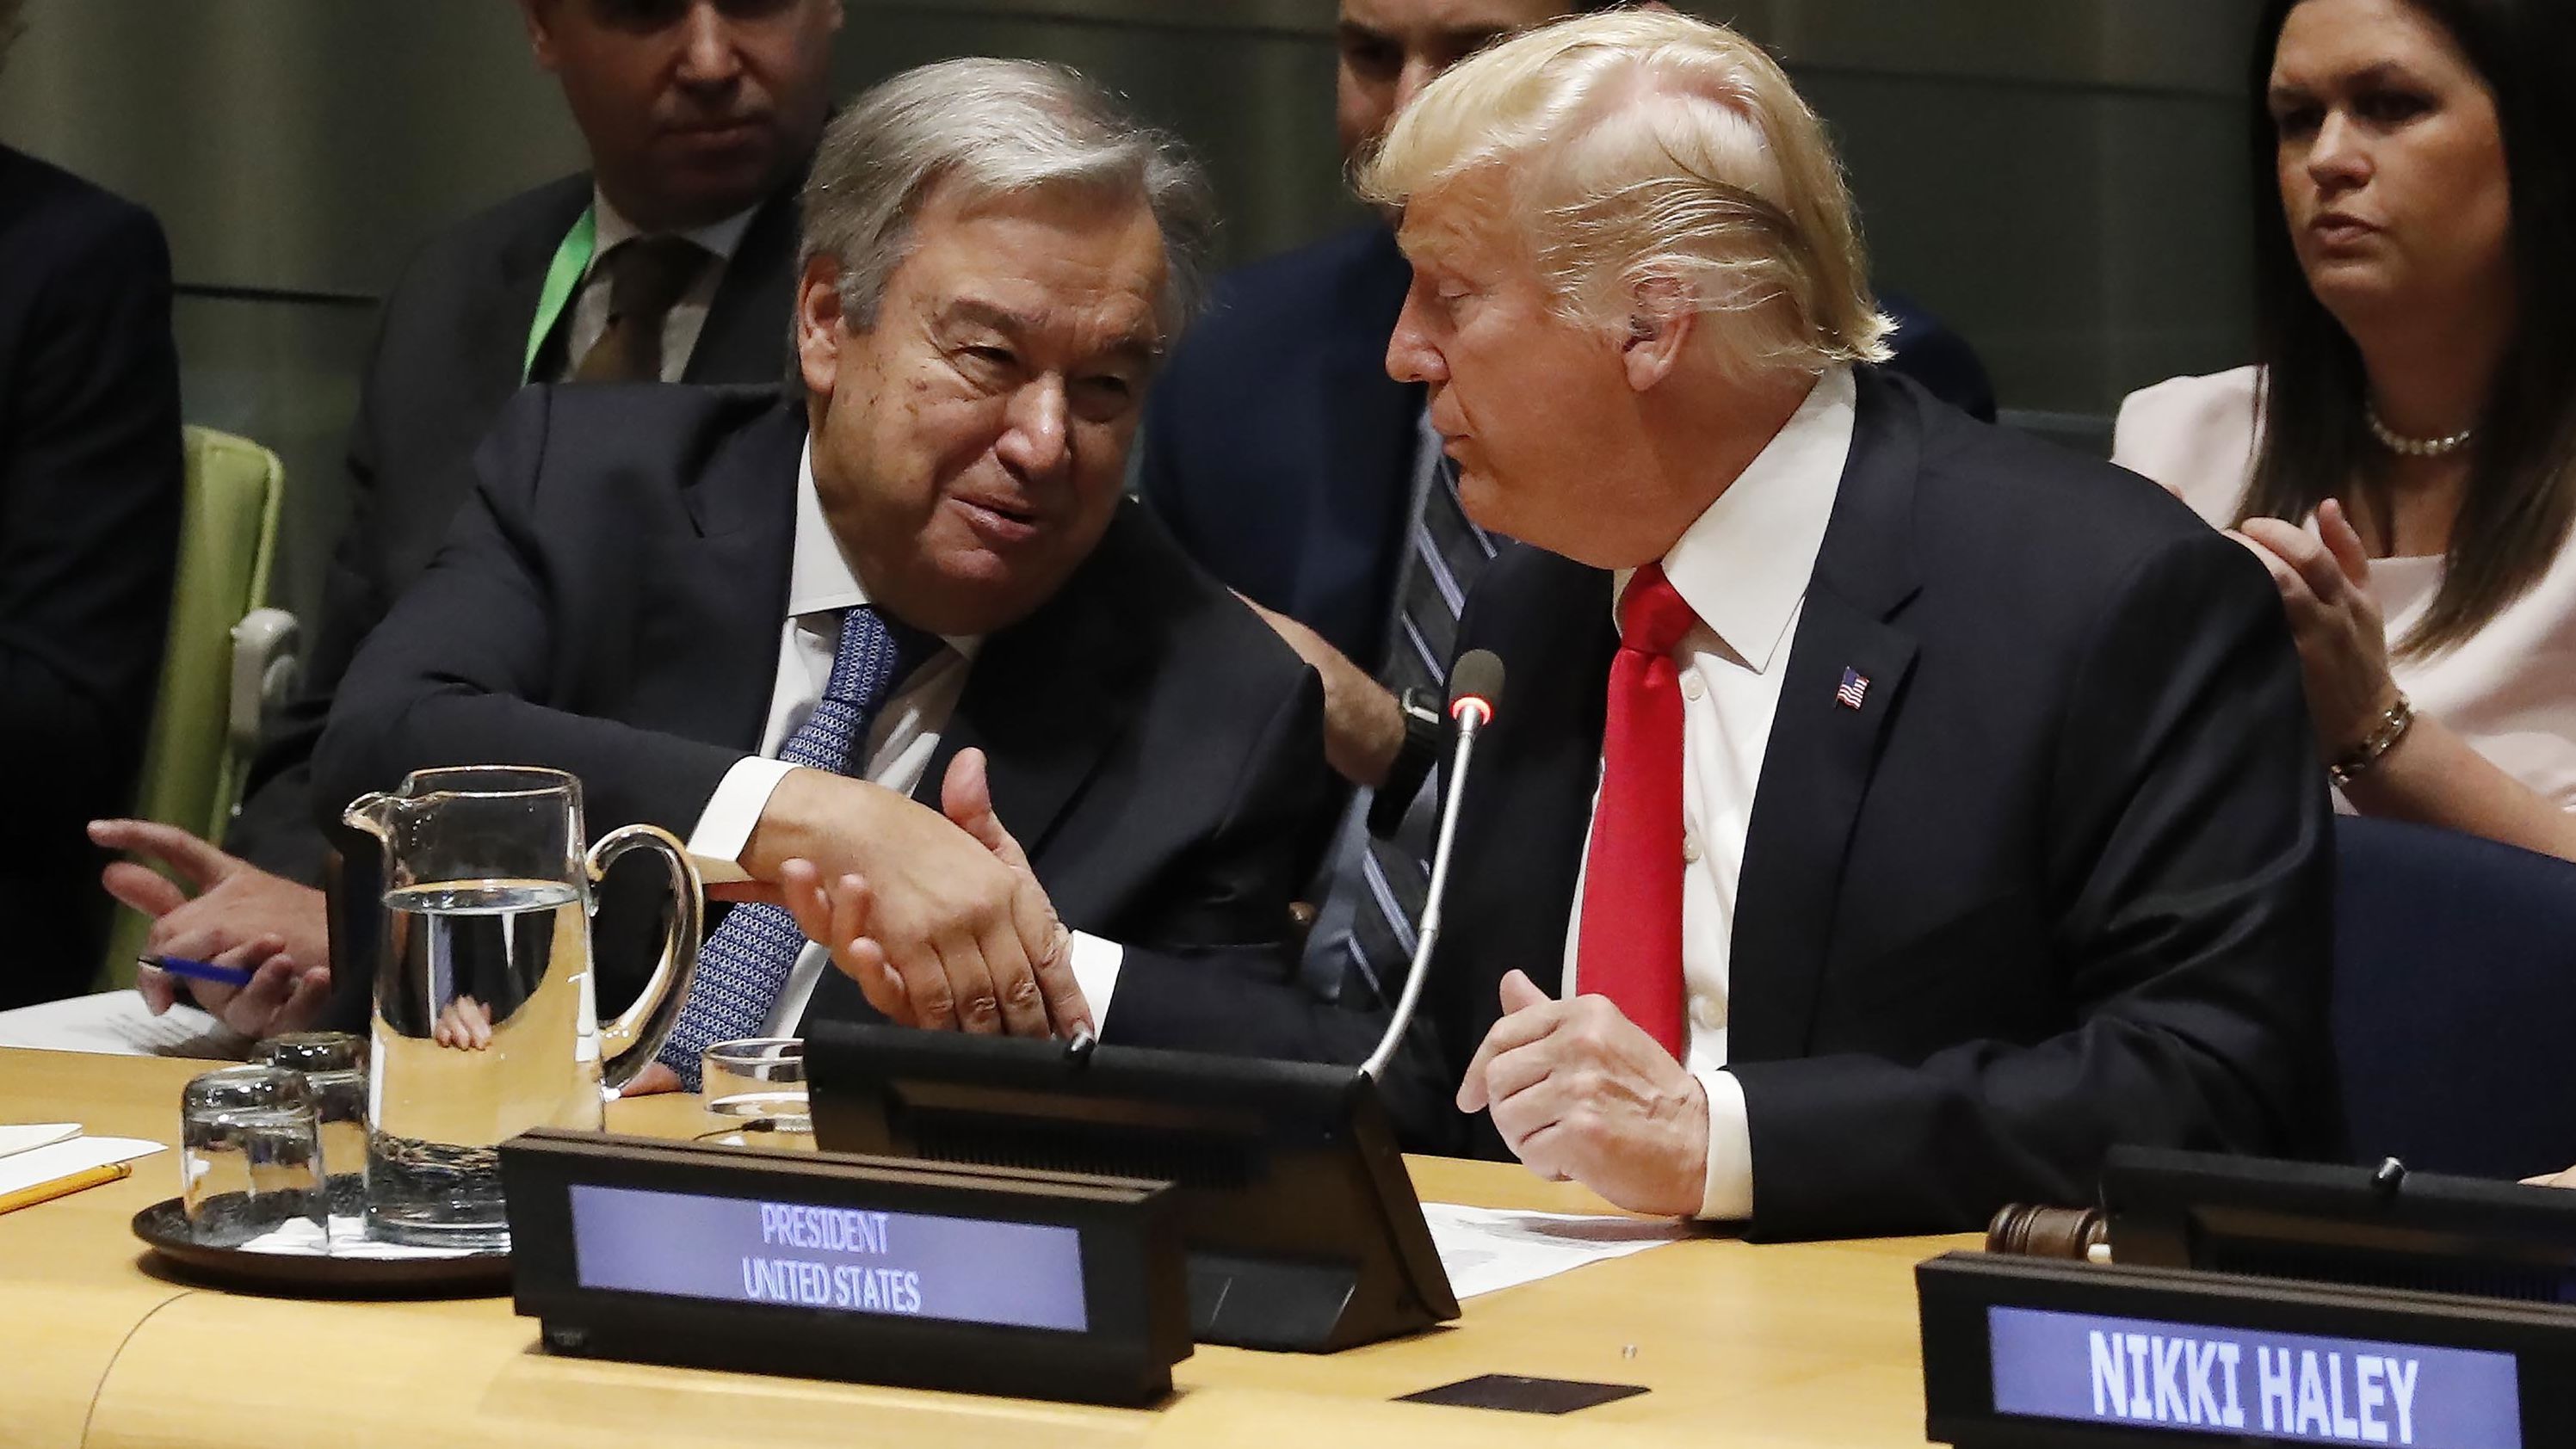 Trump shakes hands with UN Secretary-General Antonio Guterres on Monday. Trump was hosting a session about the global drug crisis. "The scourge of drug addiction continues to claim too many lives in the US and the nations around the world," Trump said. "Today we commit to fighting the drug epidemic together."